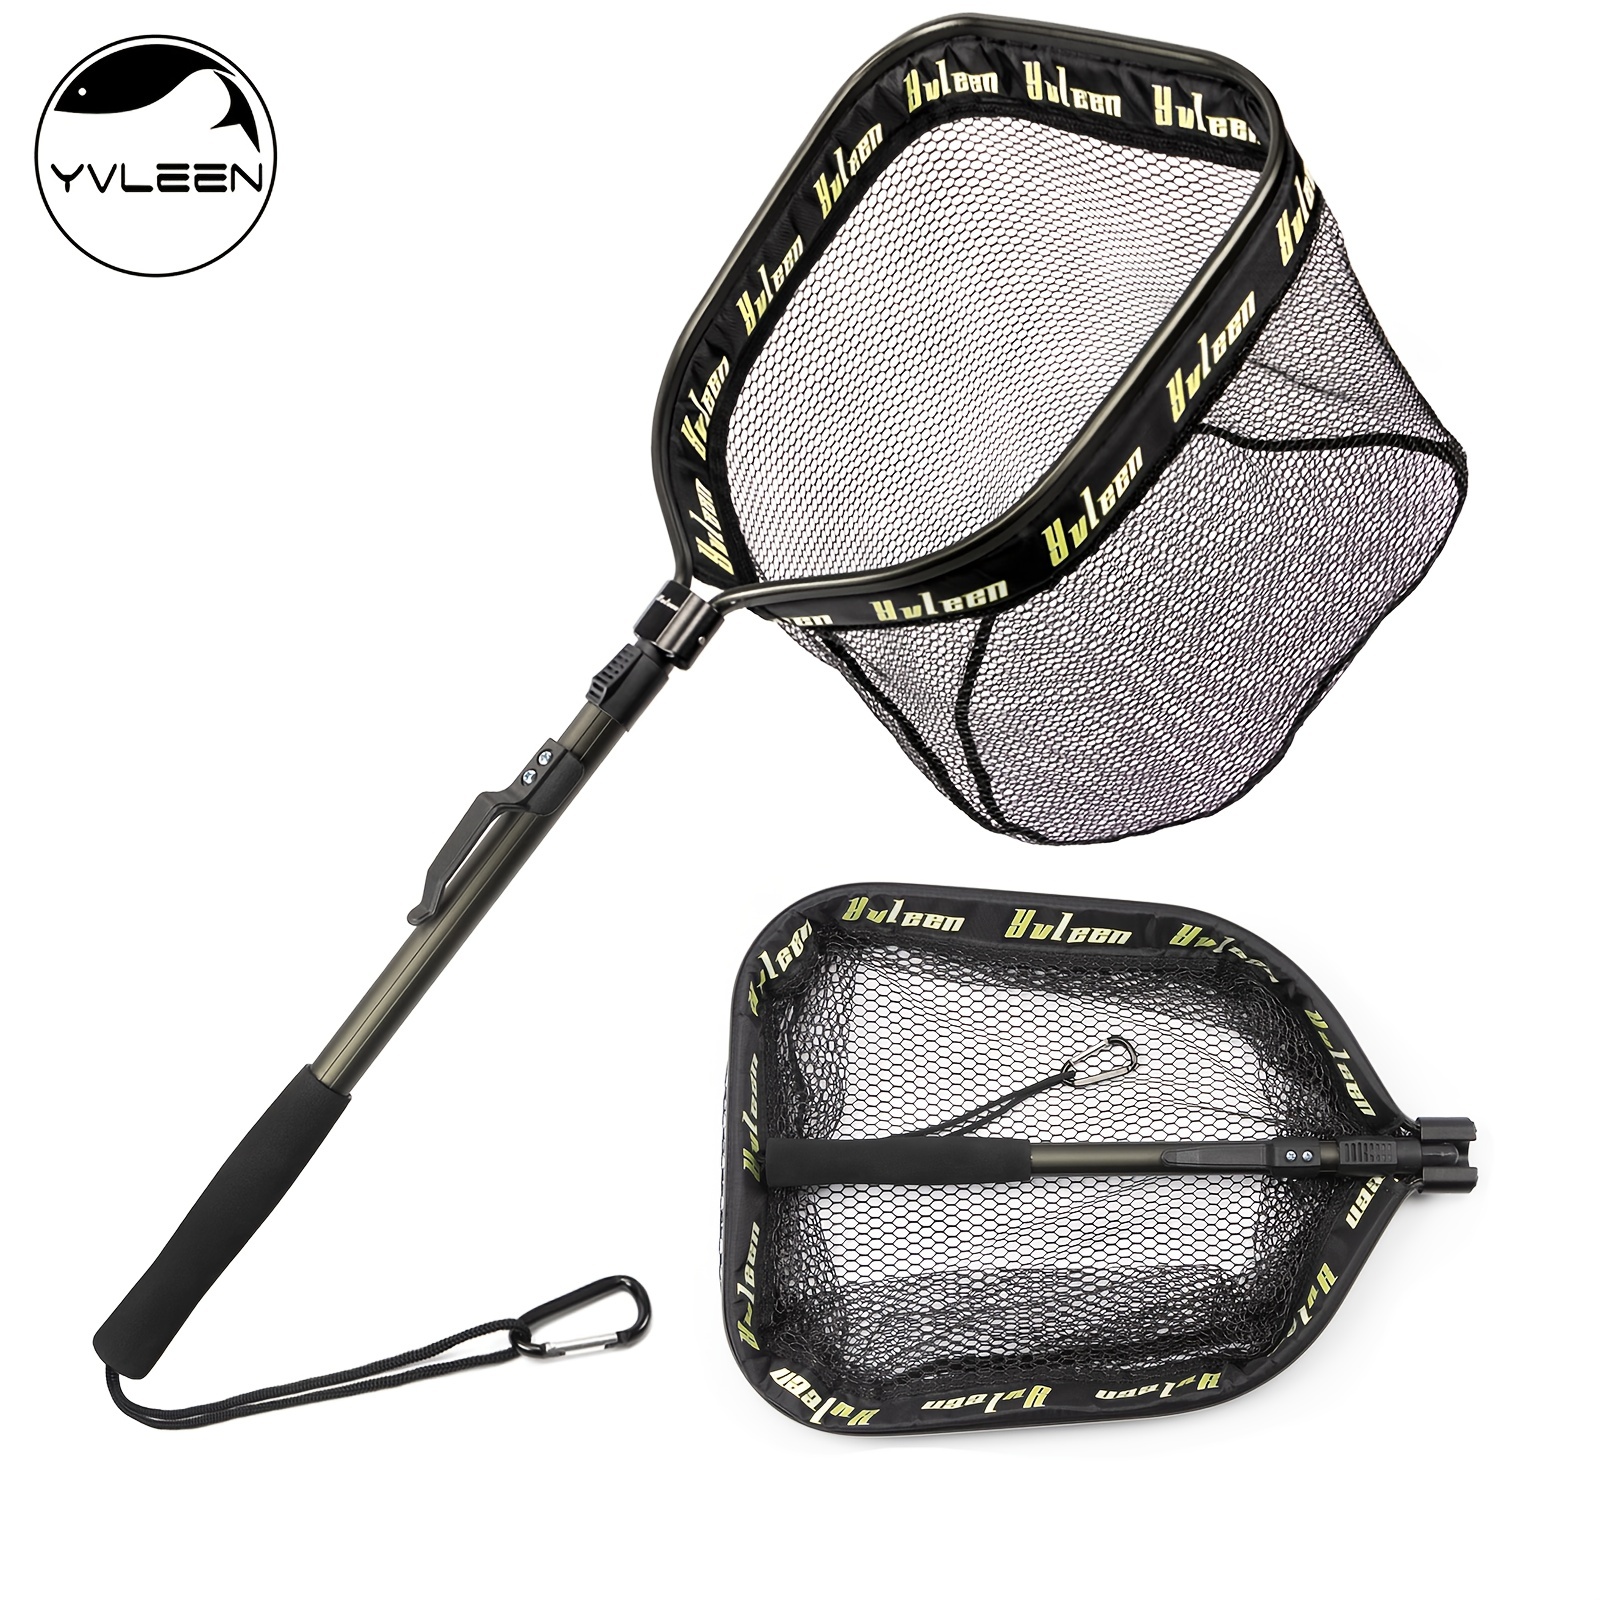 YVLEEN Rubber Coated Floating Fishing Net - Easy Fish Catch and Release for  Freshwater and Saltwater Fishing